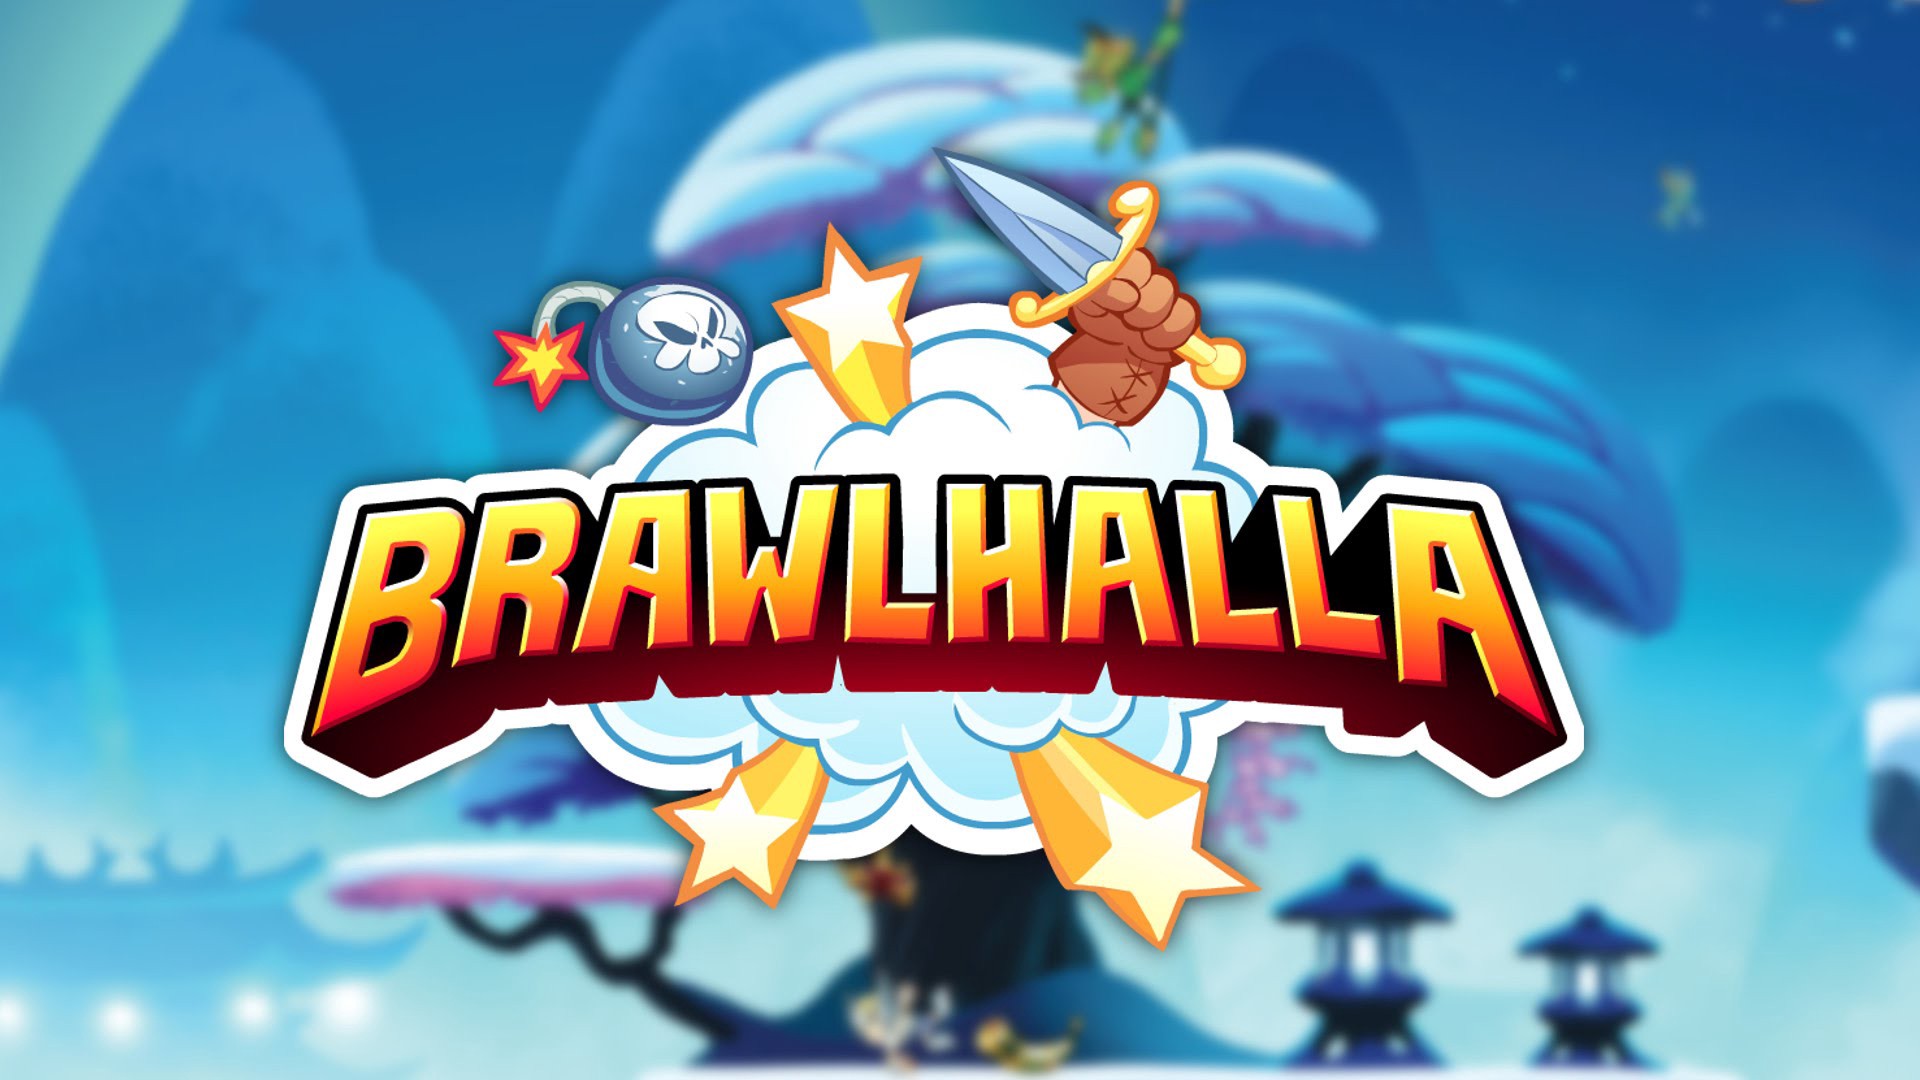 End of the line for Brawlhalla